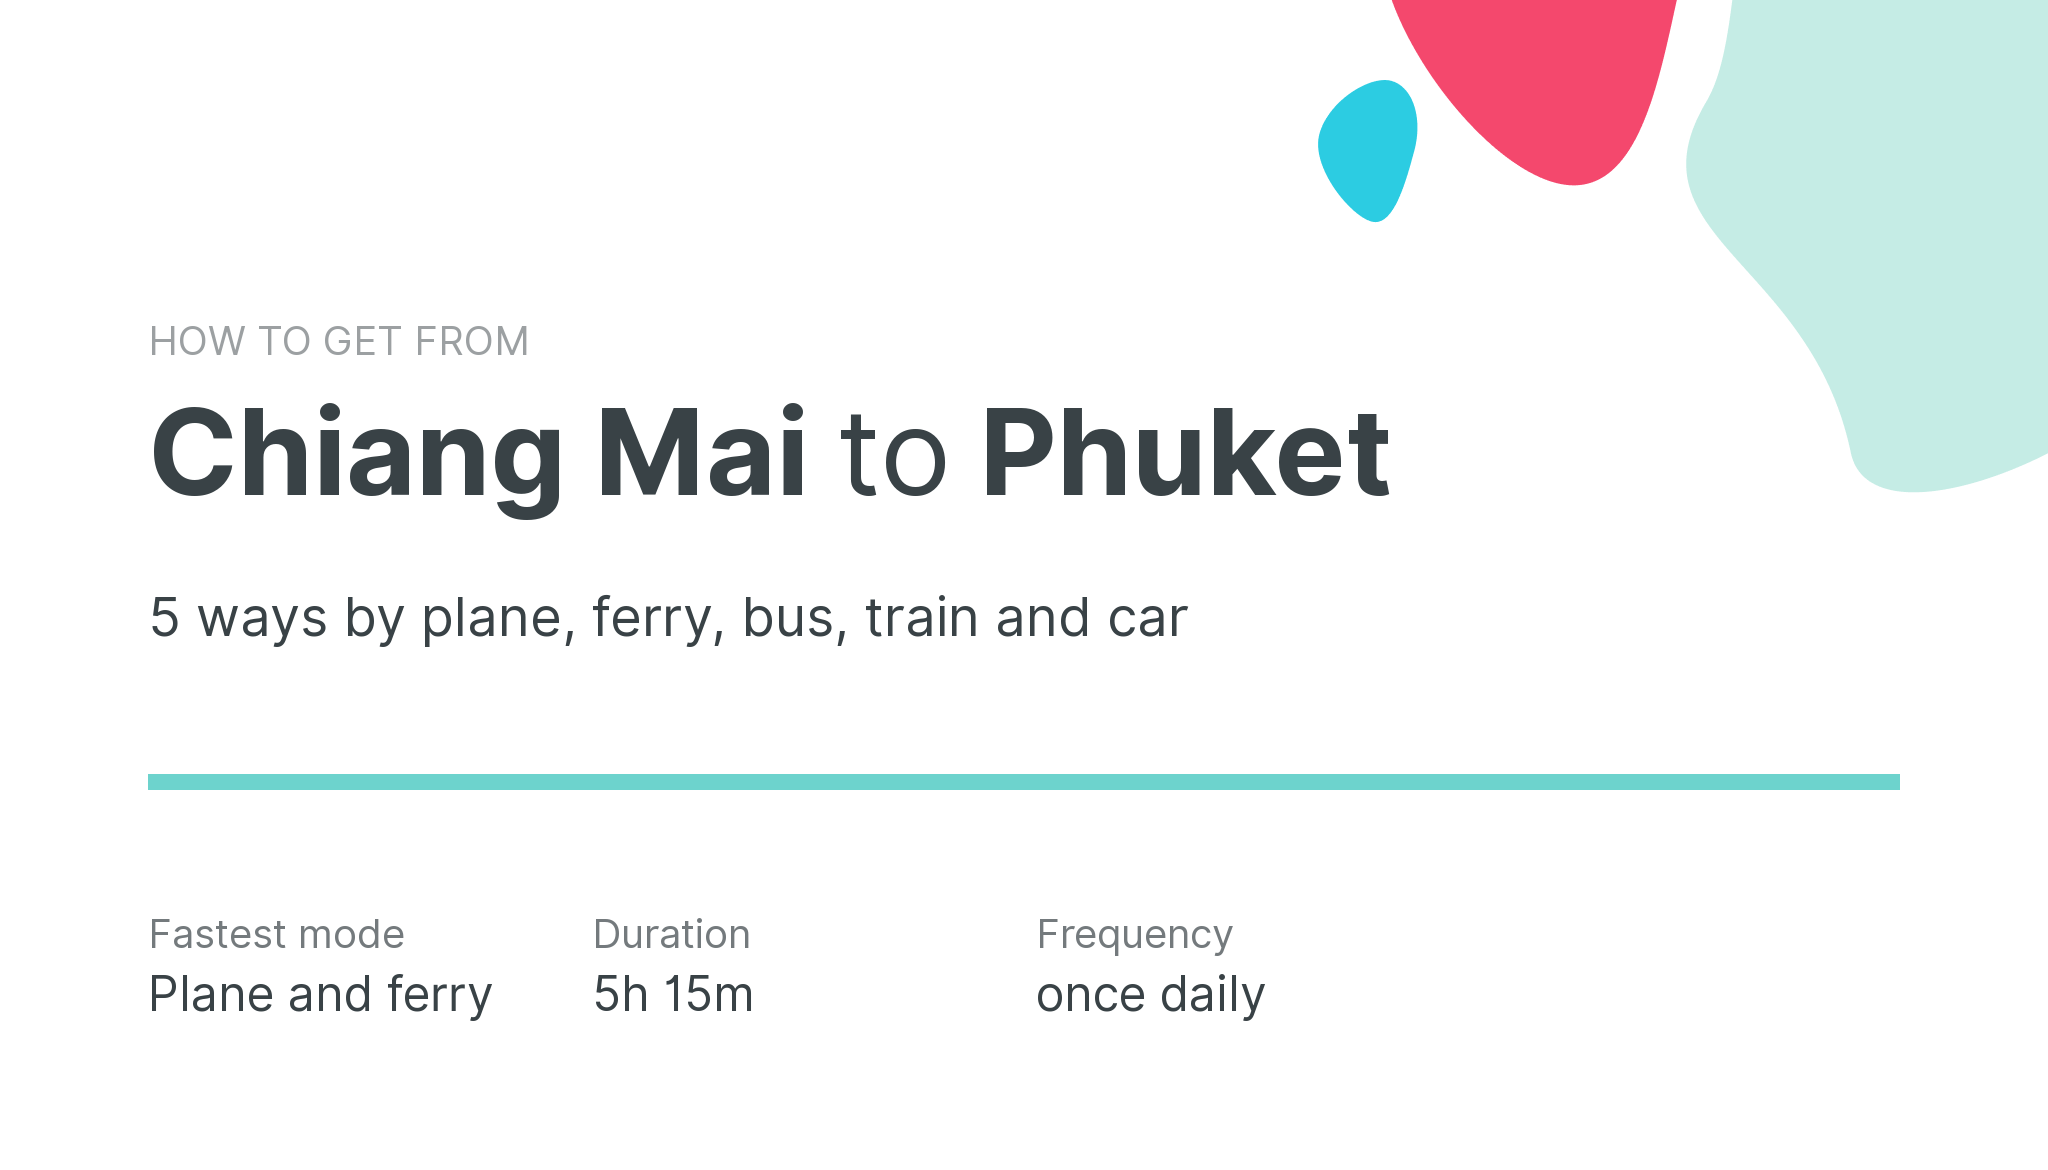 How do I get from Chiang Mai to Phuket